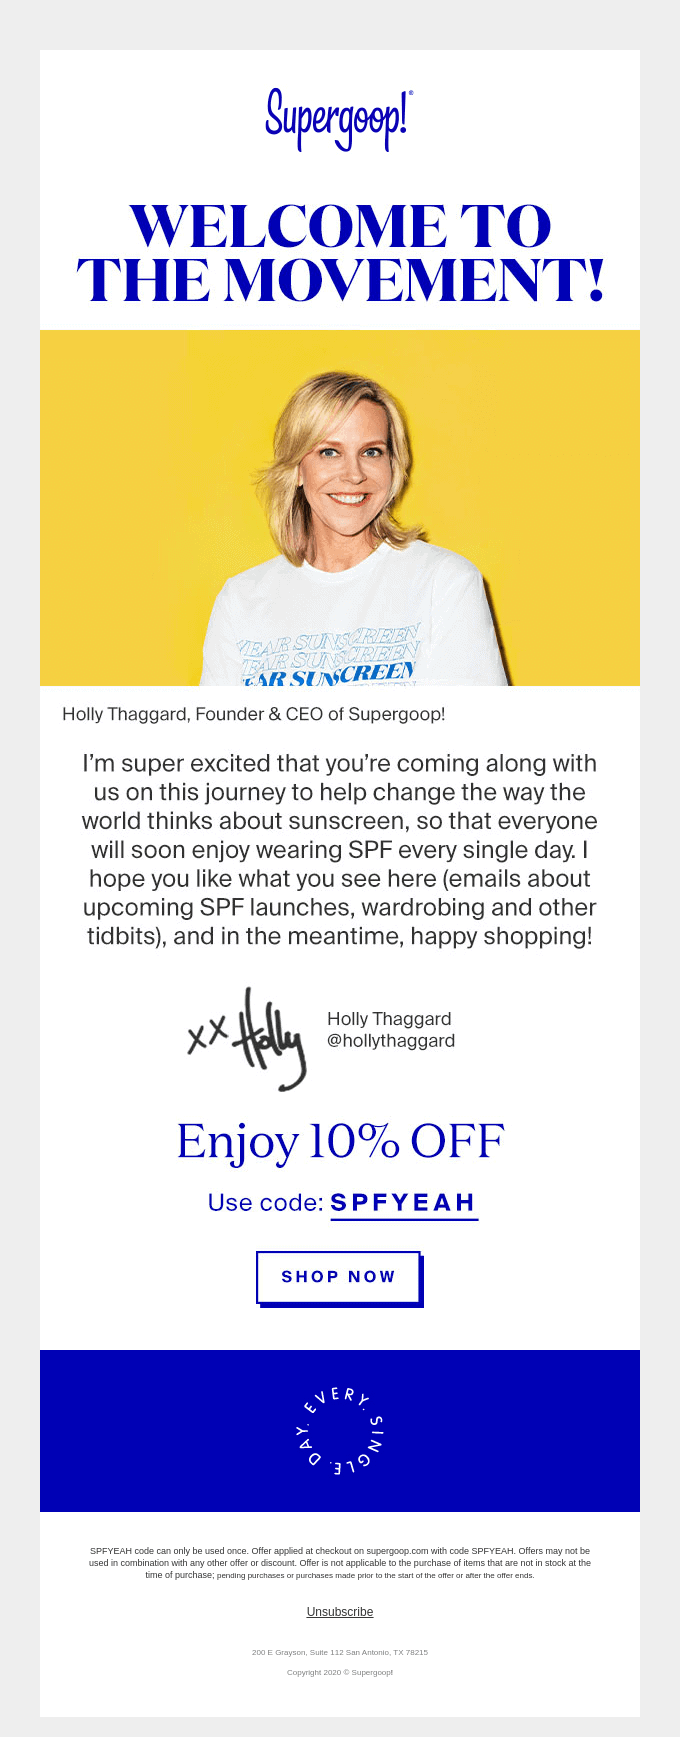 Automatic welcome email example from Supergoop